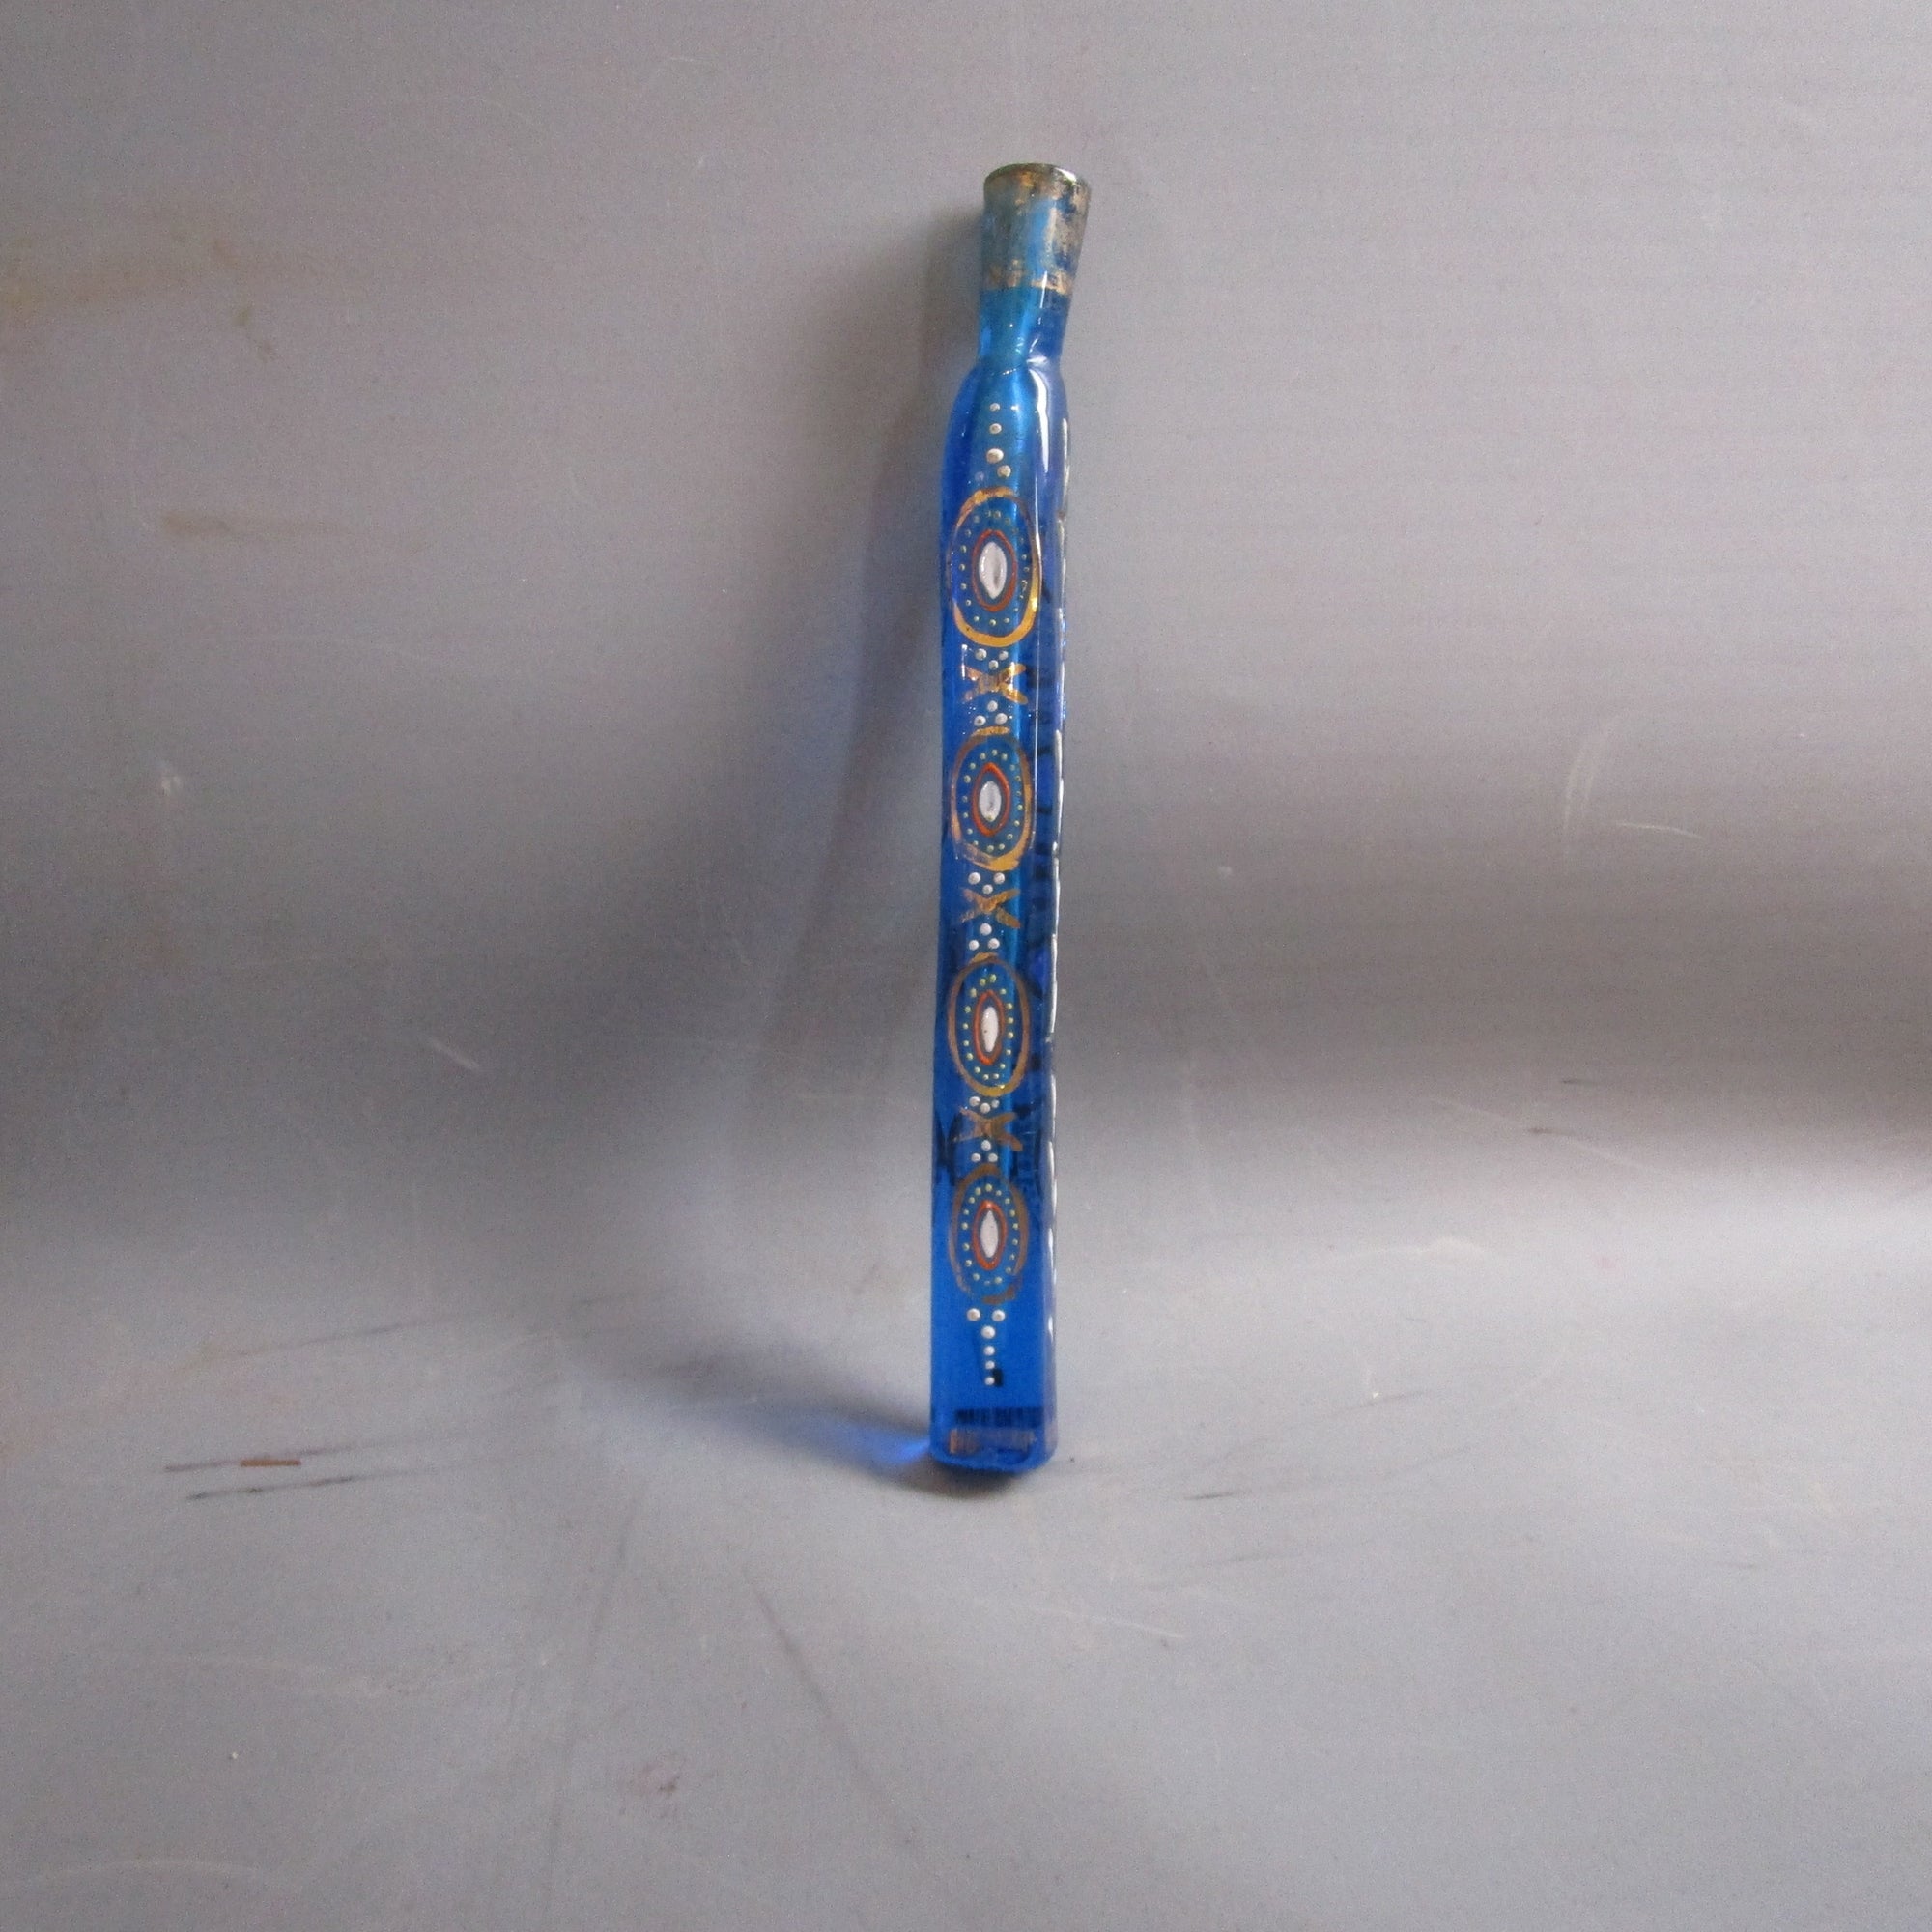 Gypsy Painted Turquoise Glass Witches TearLavender Scent Bottle Antique c1810